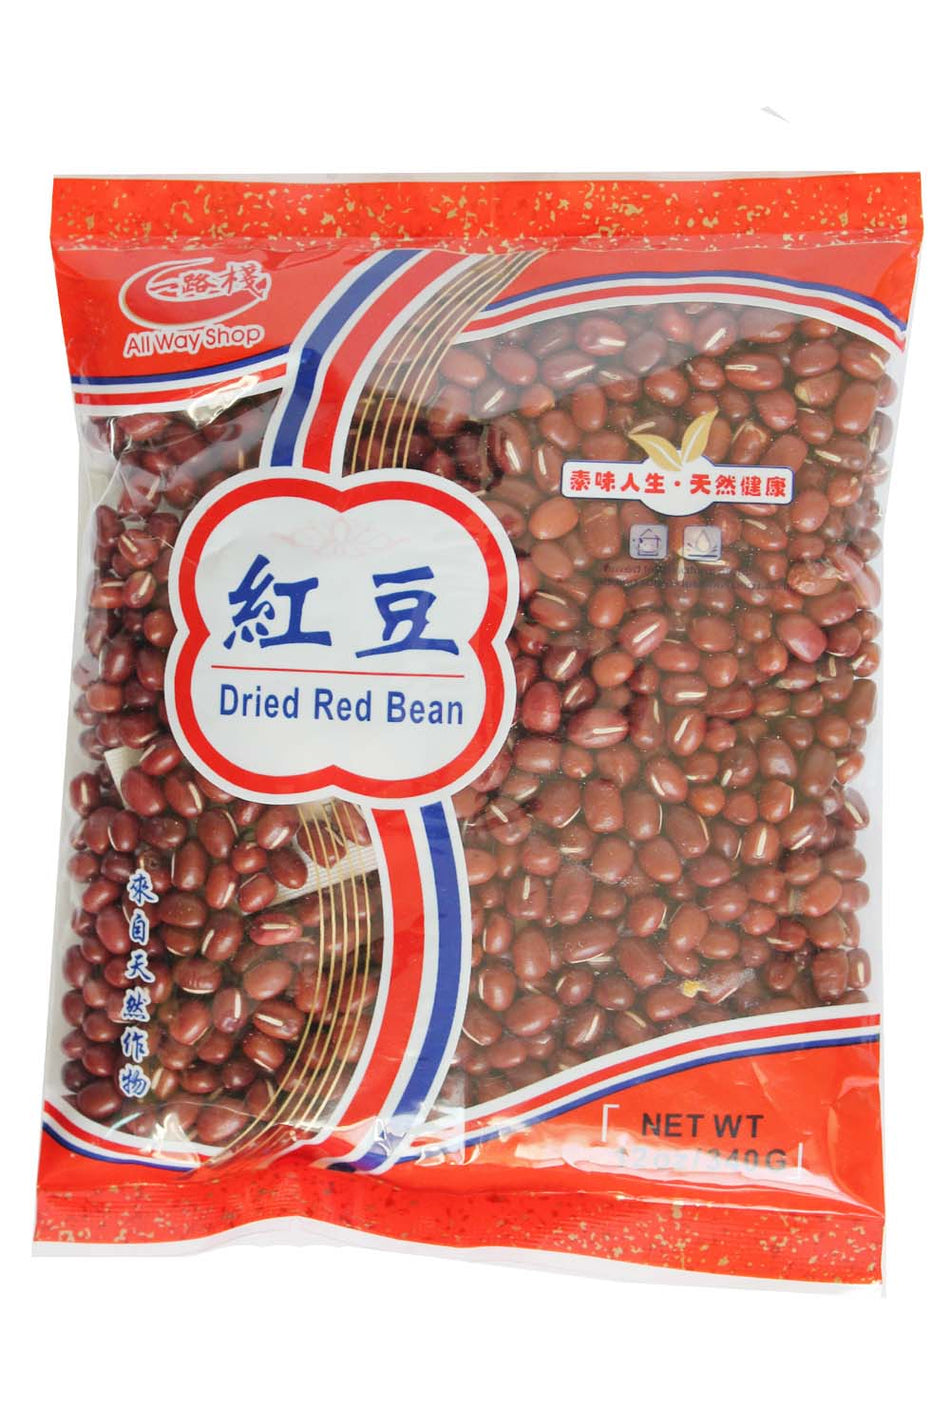 All Way Shop Dried  Red Bean